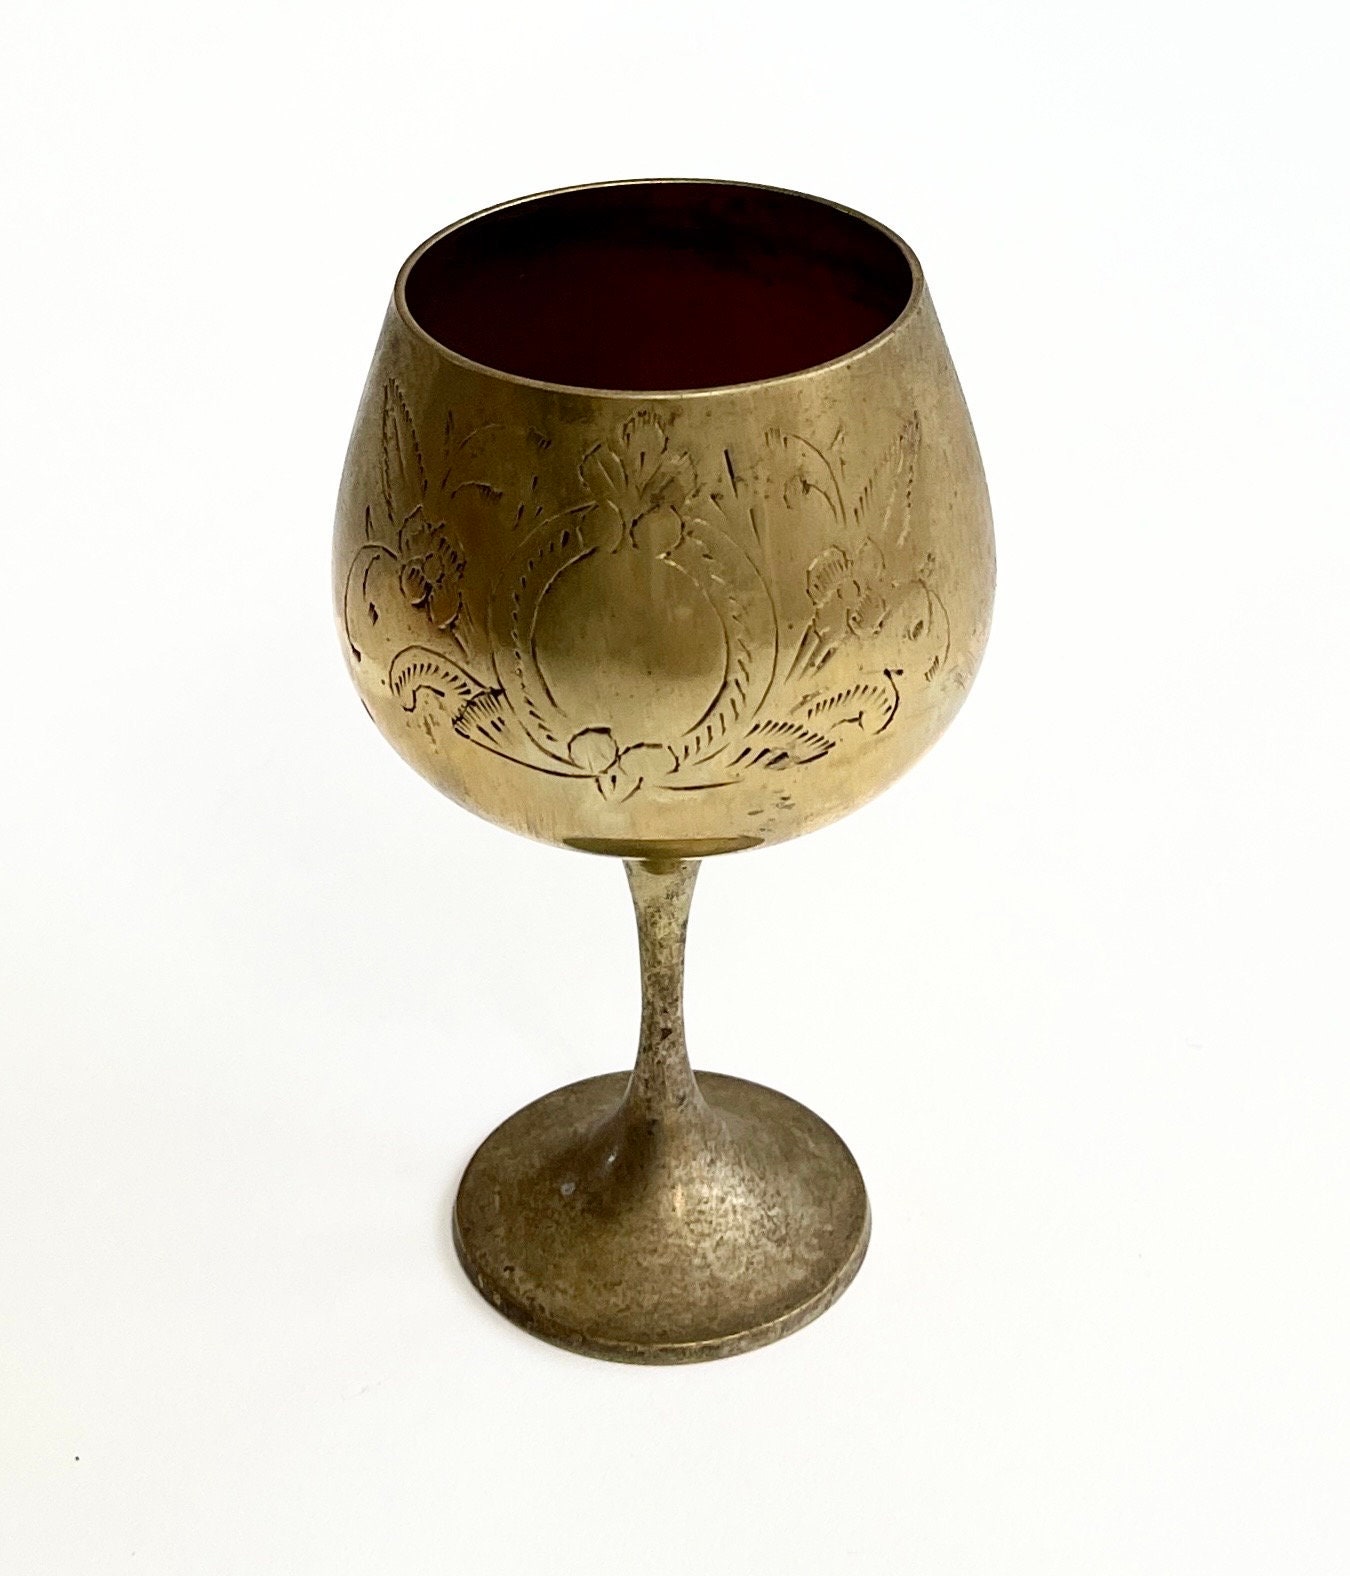 Etched Indian Brass Goblet Chalice Vintage 60s 70s Floral Flower Etchings  Solid Brass Stemmed Cup Wine Glass Likely Made in Indian